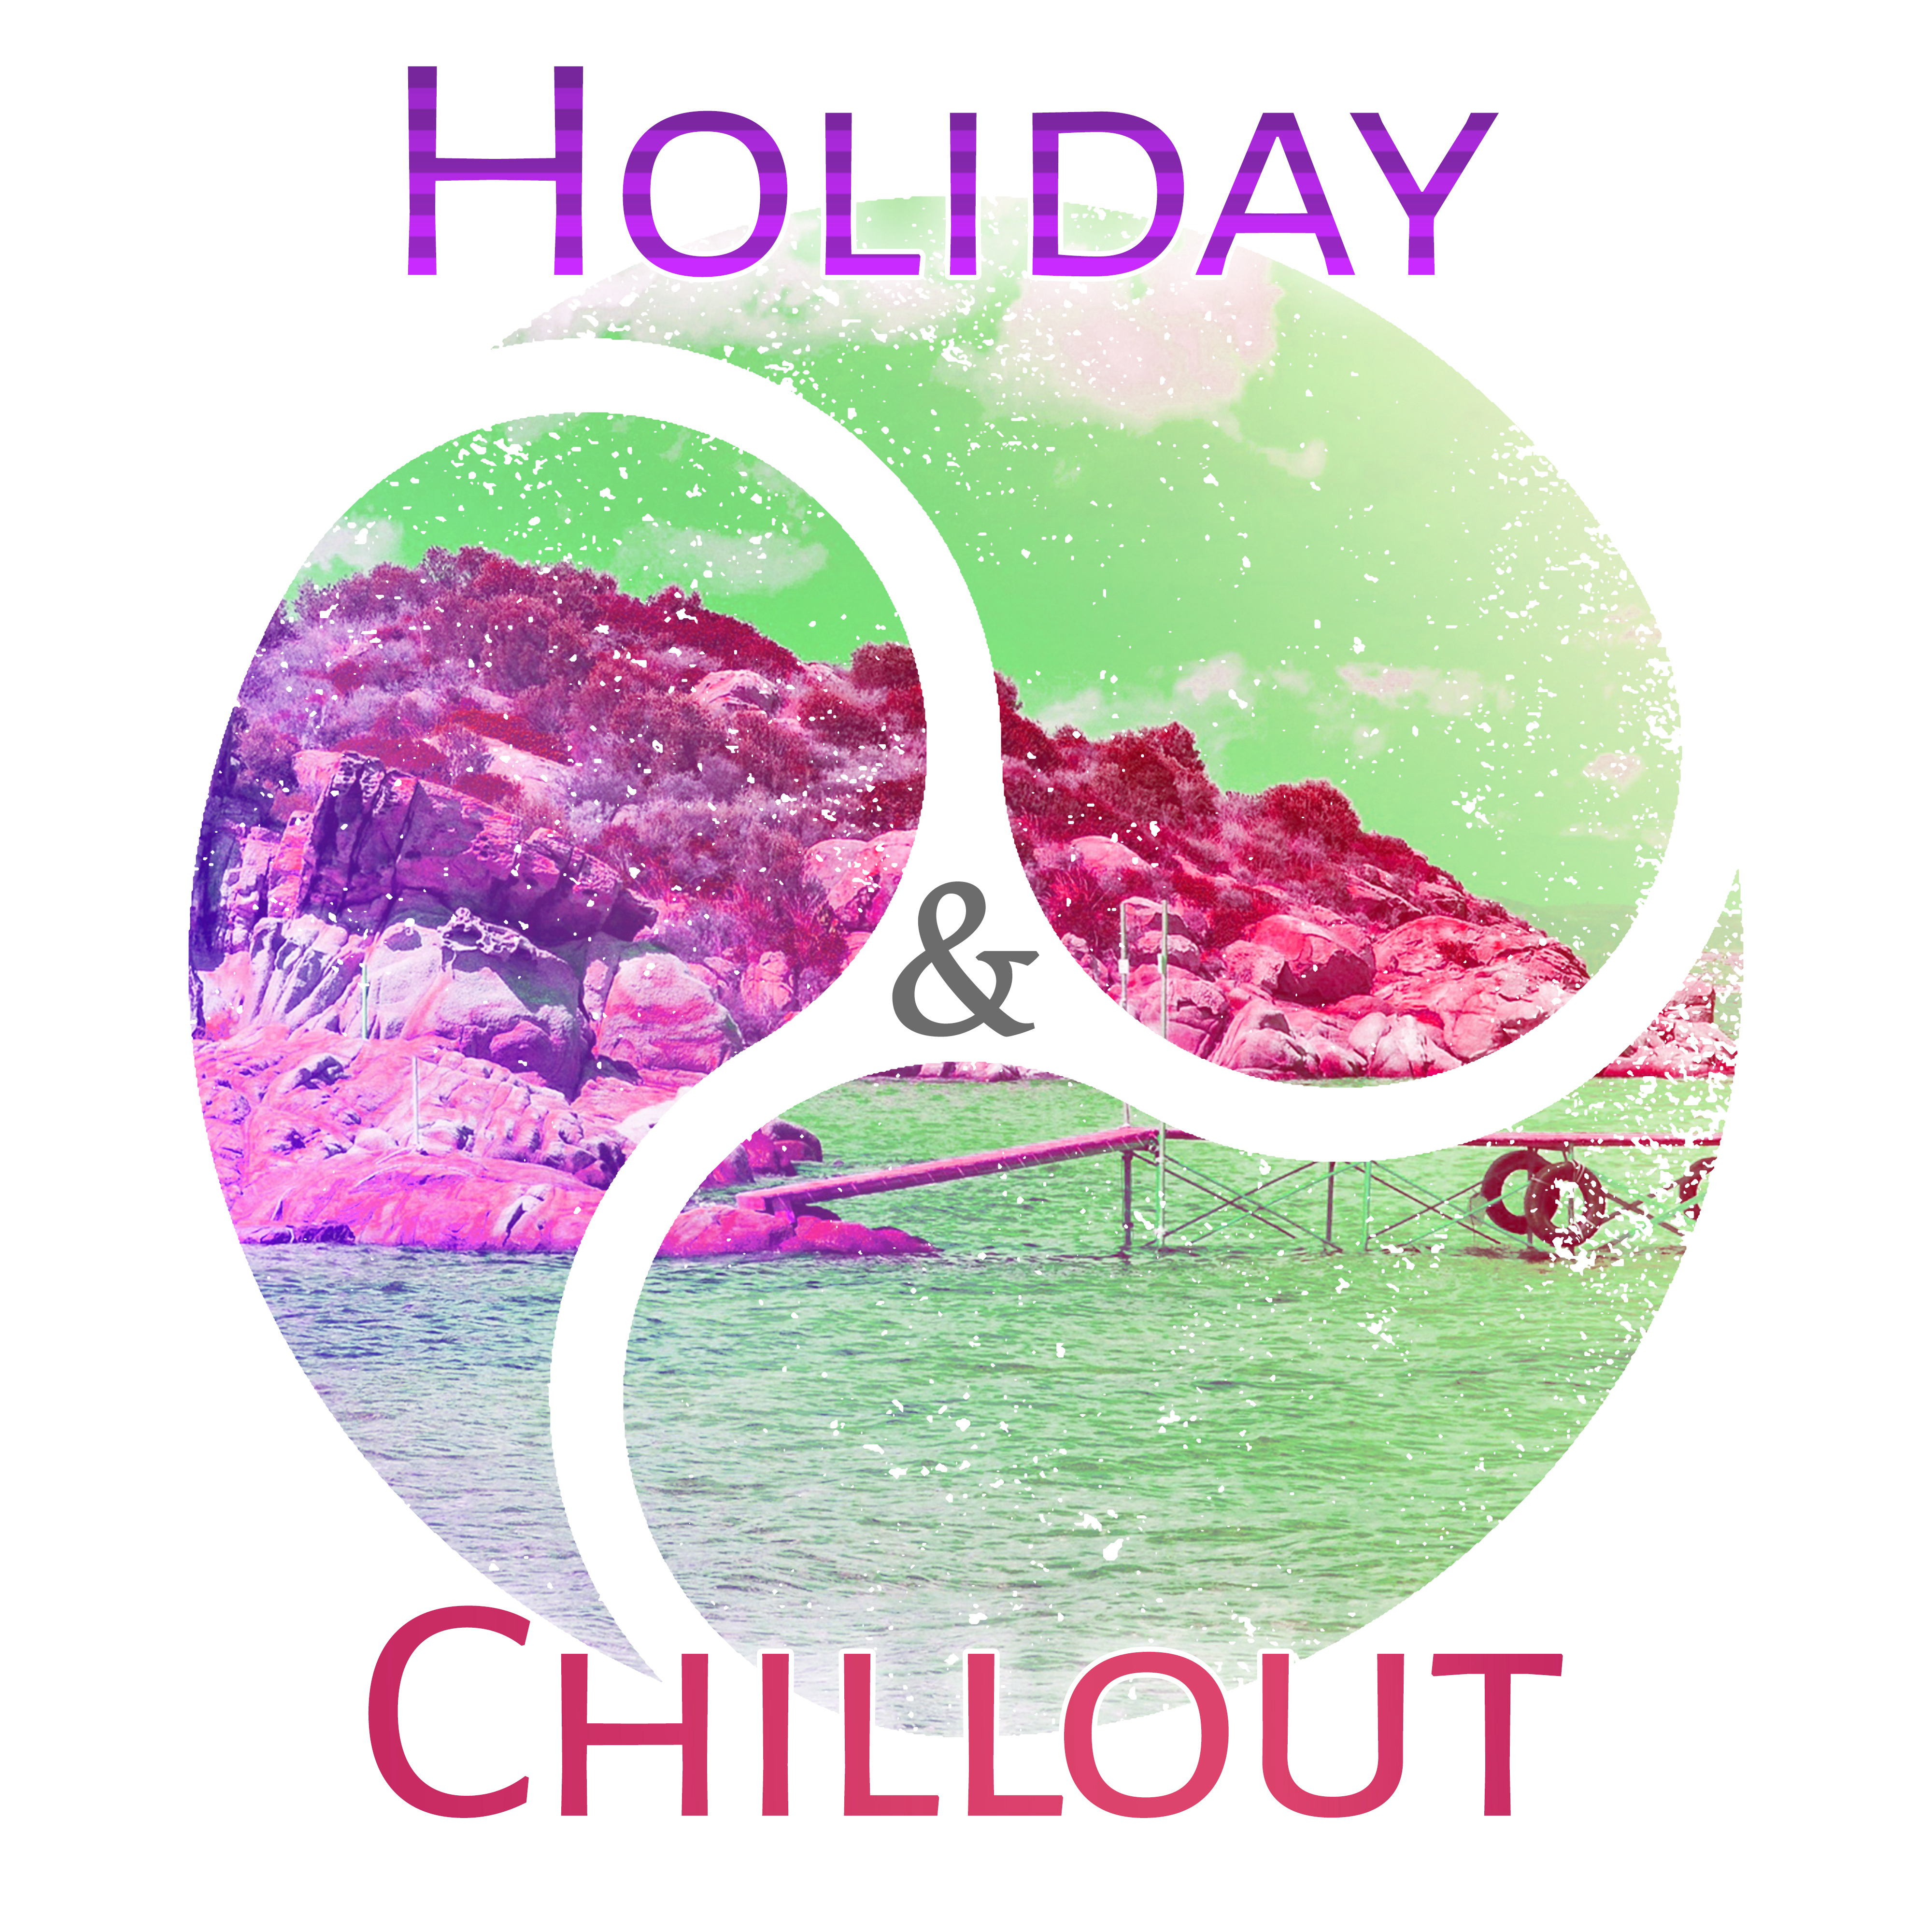 Holiday  Chillout  Relaxation Sounds, Pure Waves, Summertime, Total Chillout on the Beach, Sunrise